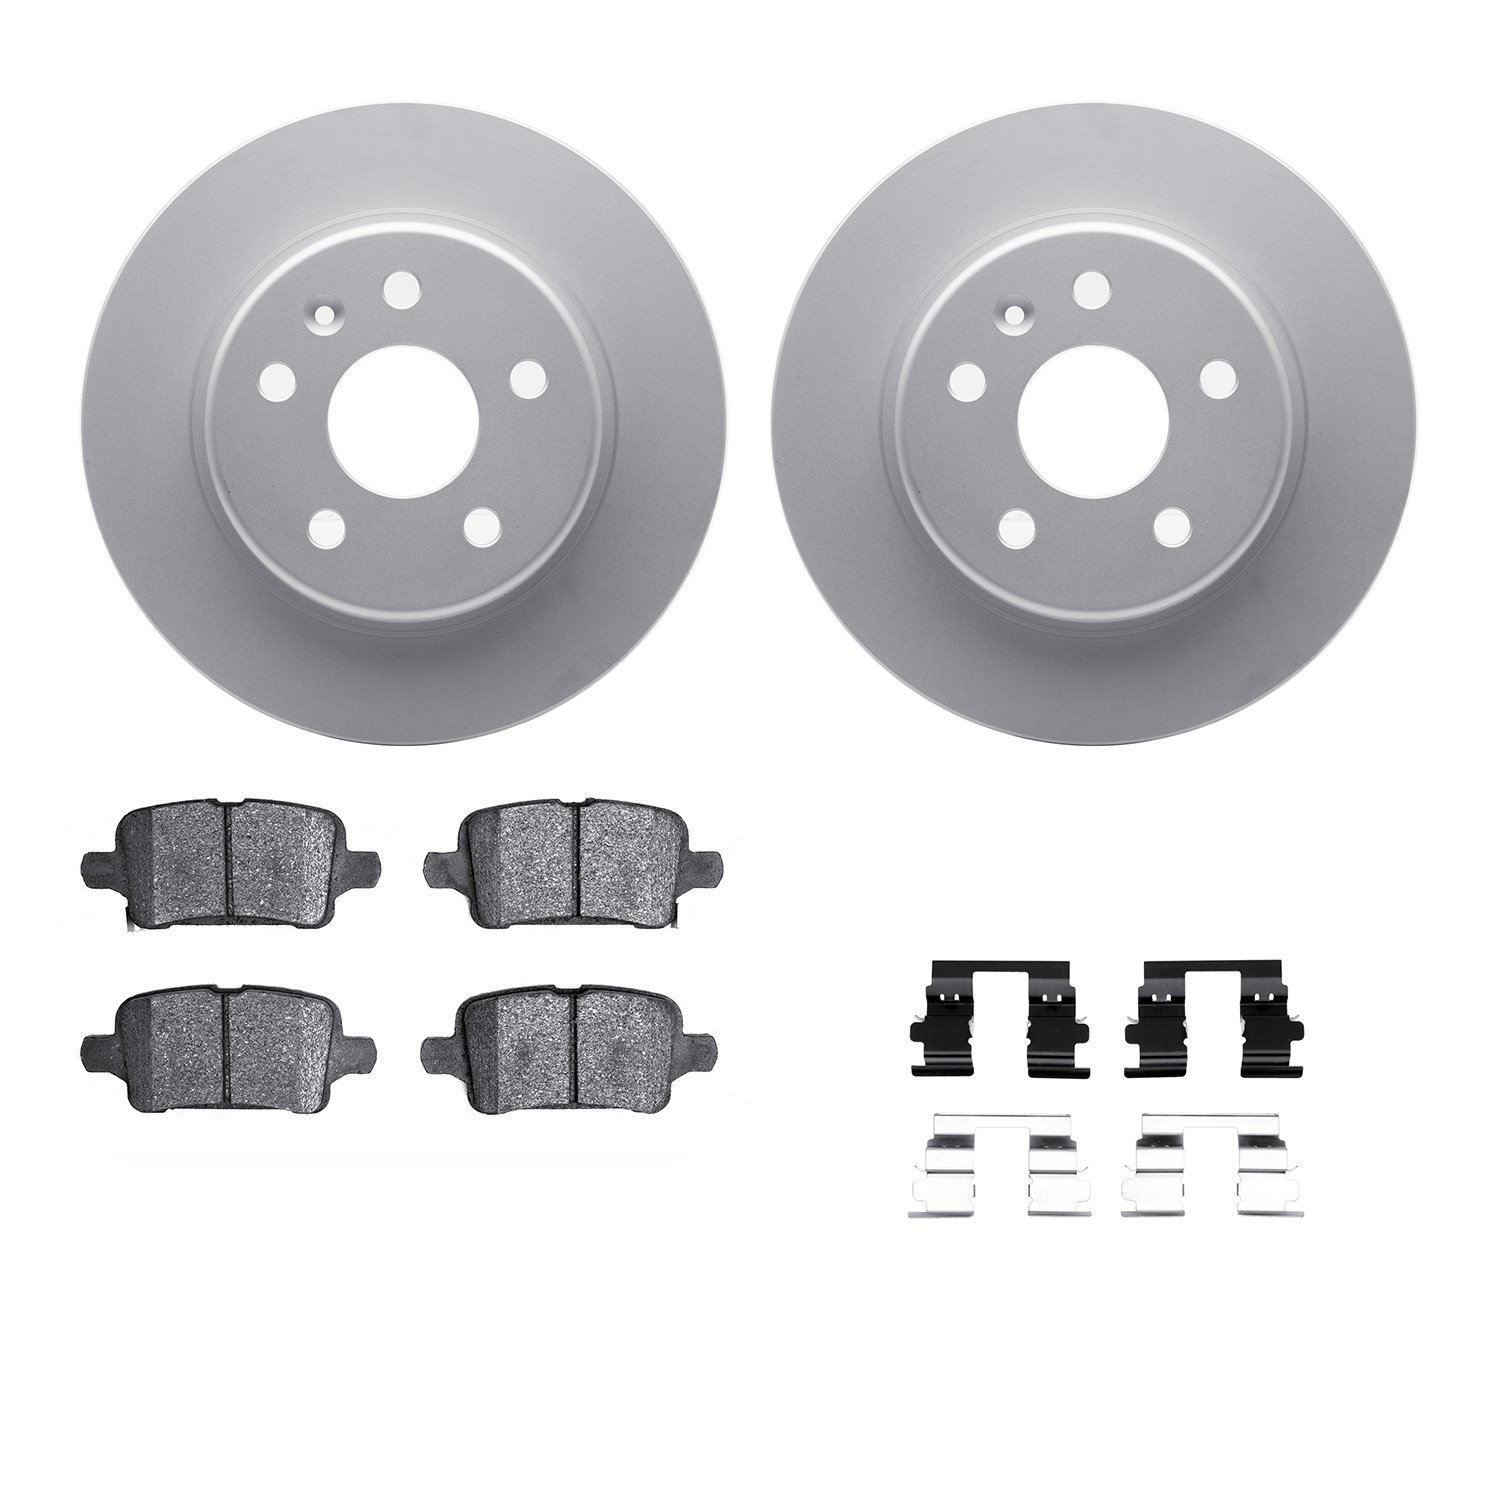 4312-47045 Geospec Brake Rotors with 3000-Series Ceramic Brake Pads & Hardware, Fits Select GM, Position: Rear